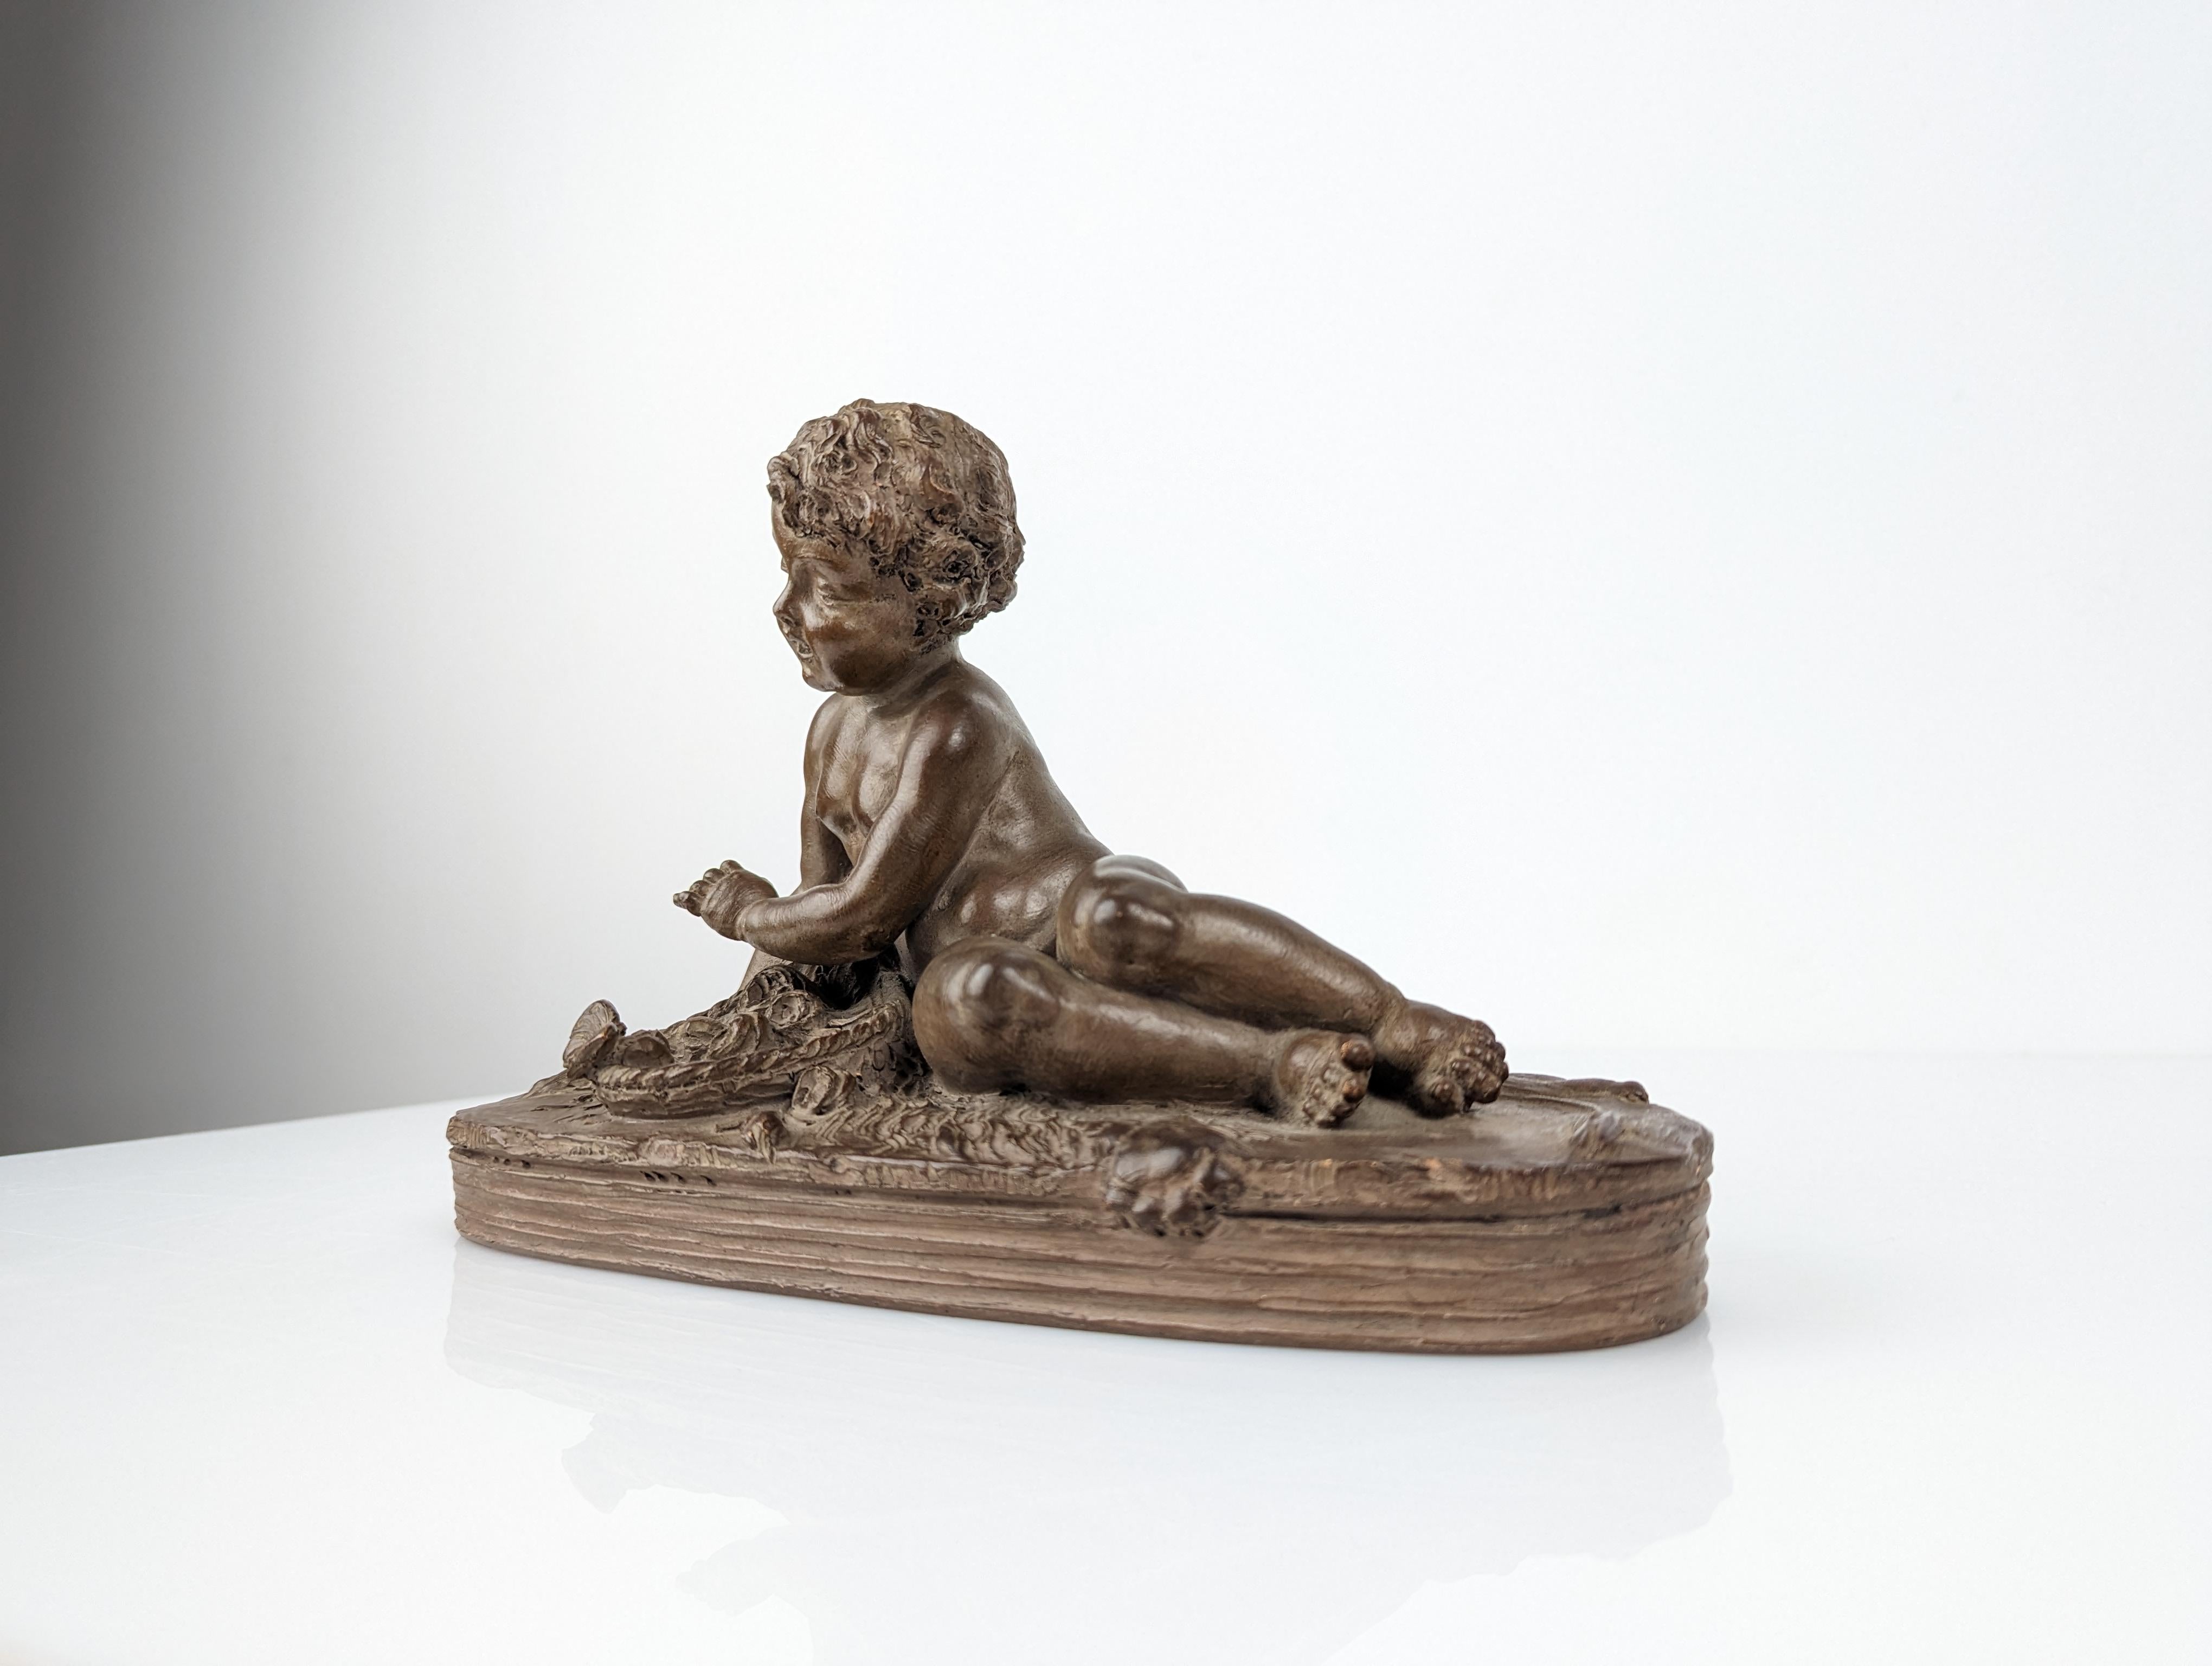 Masterful sculpture by the French artist Renè Rod made in terracotta at the end of the 19th century, sublimely showing us Hercules as a child, lying on a lion skin representing strength. In front of him, a basket with flowers alluding to the beauty